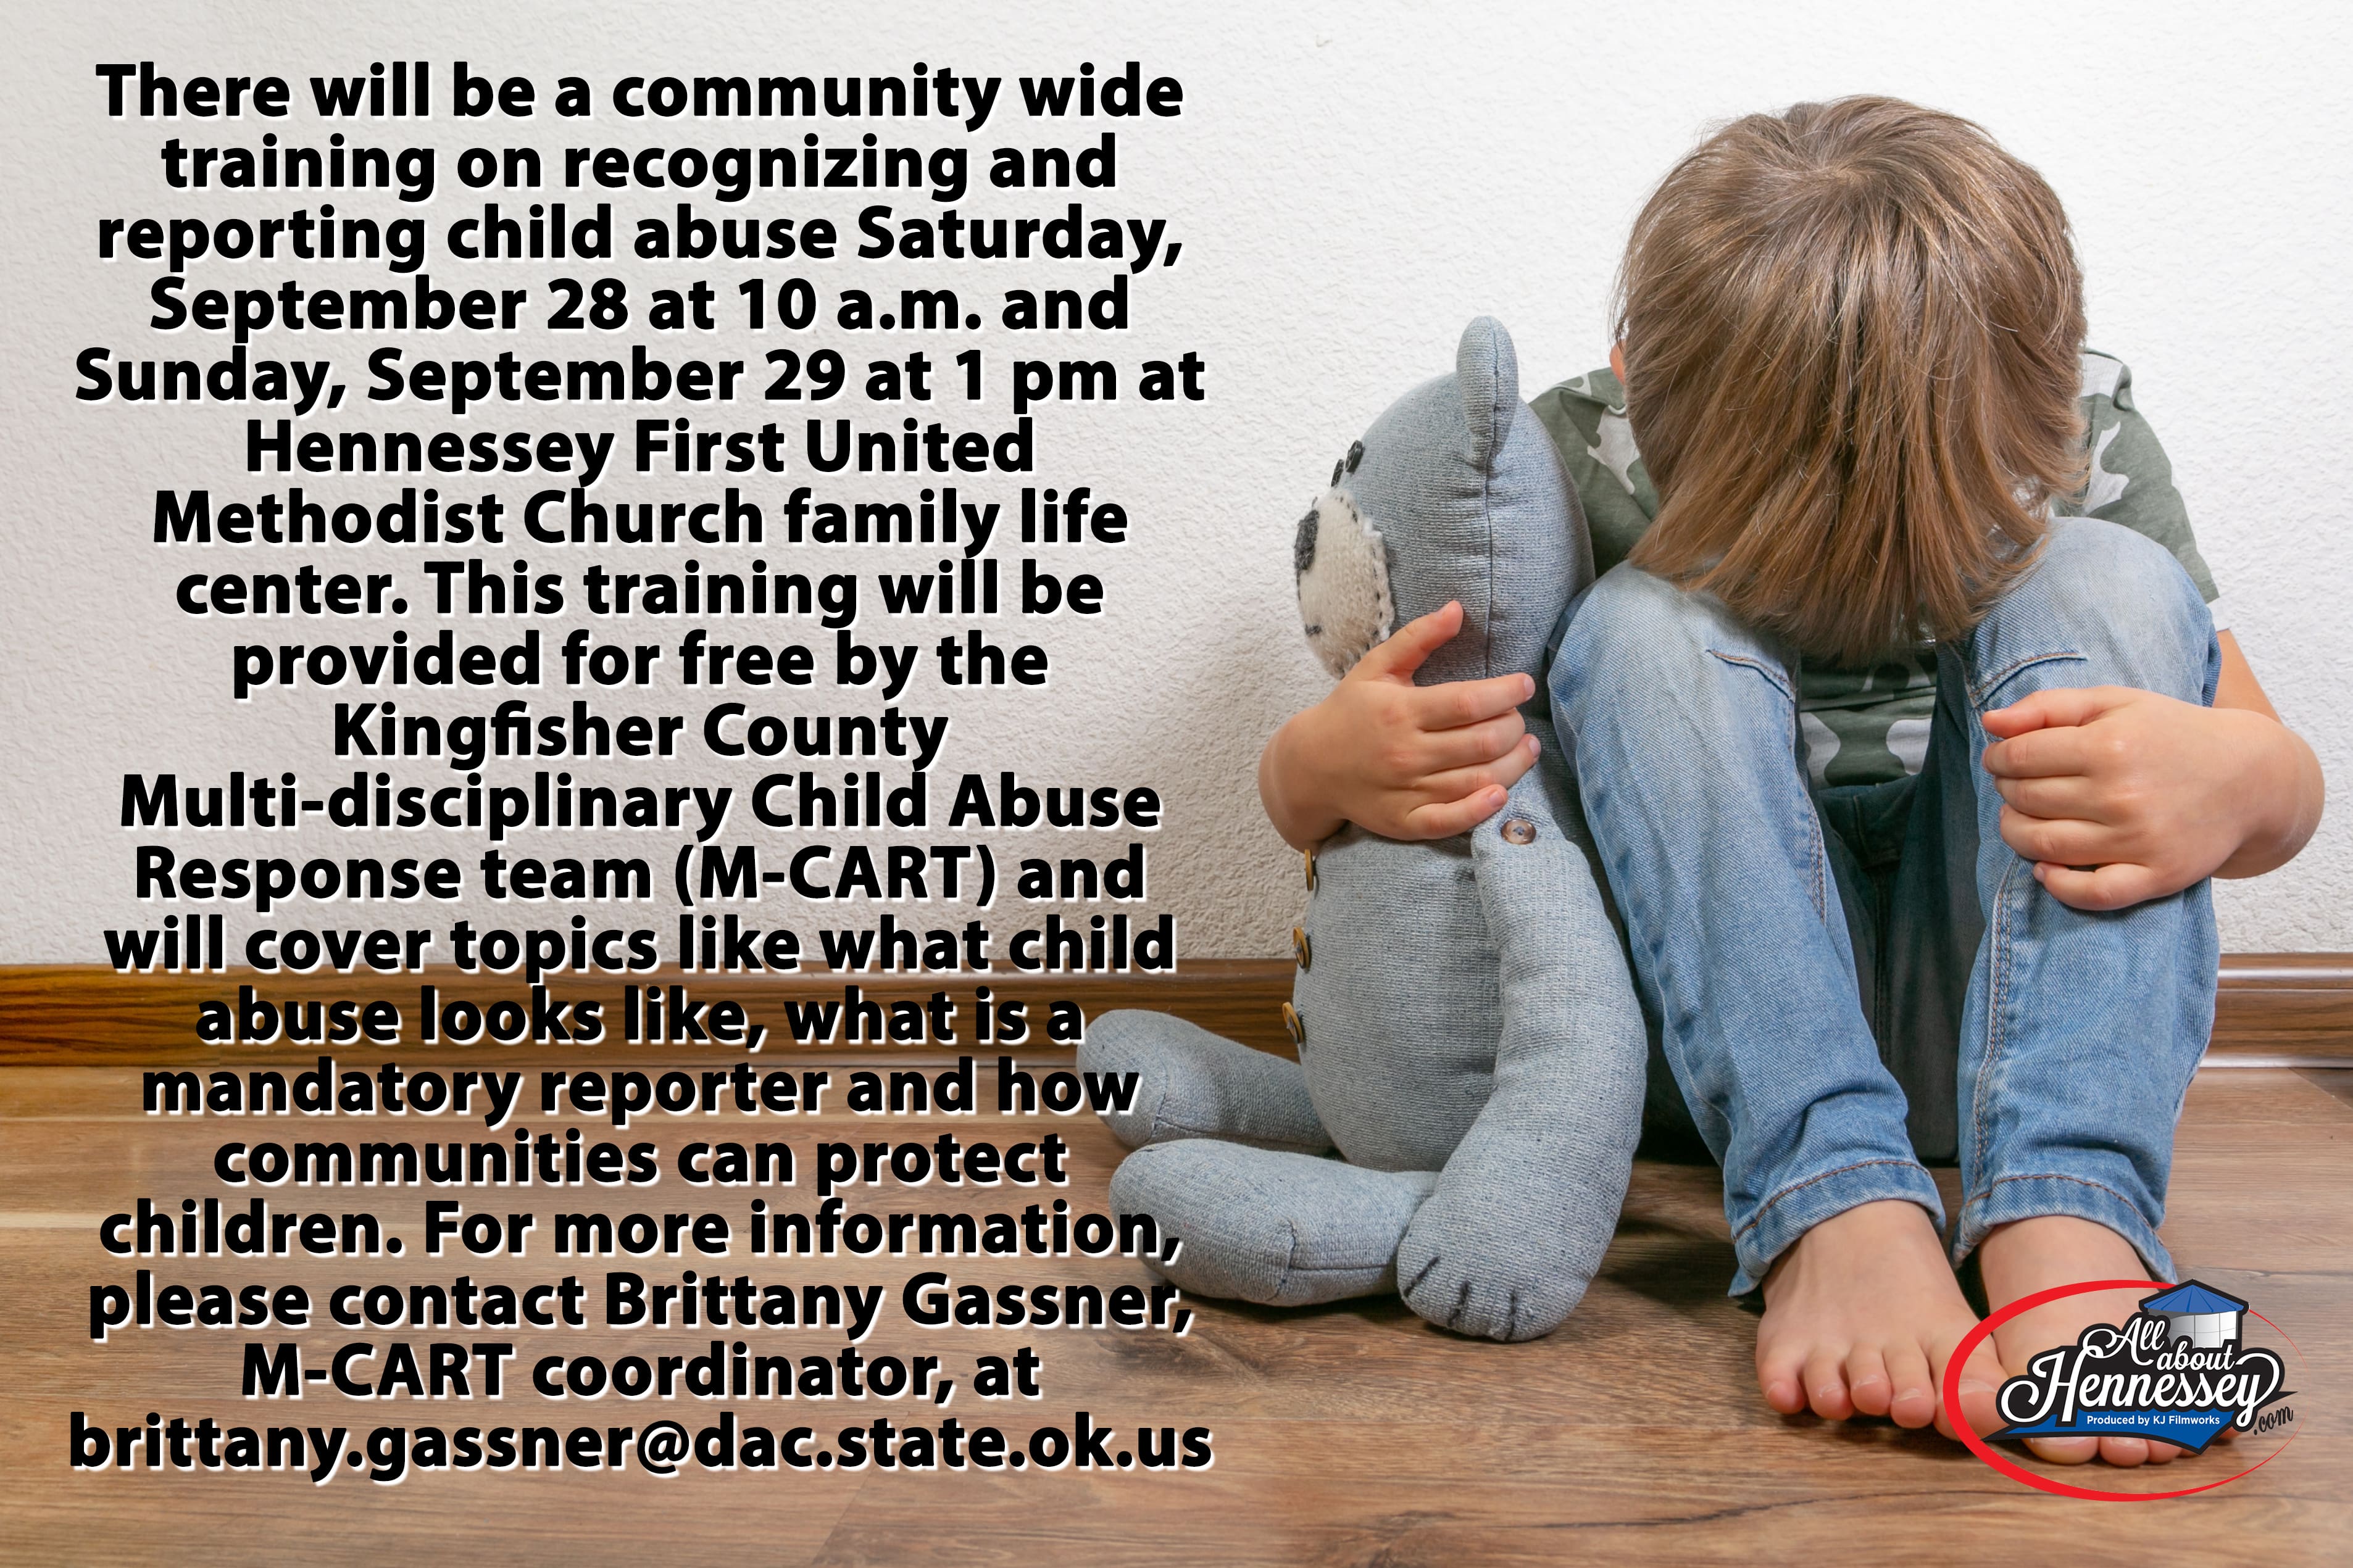 Community-wide Training for reporting child abuse at Hennessey First Methodist Church